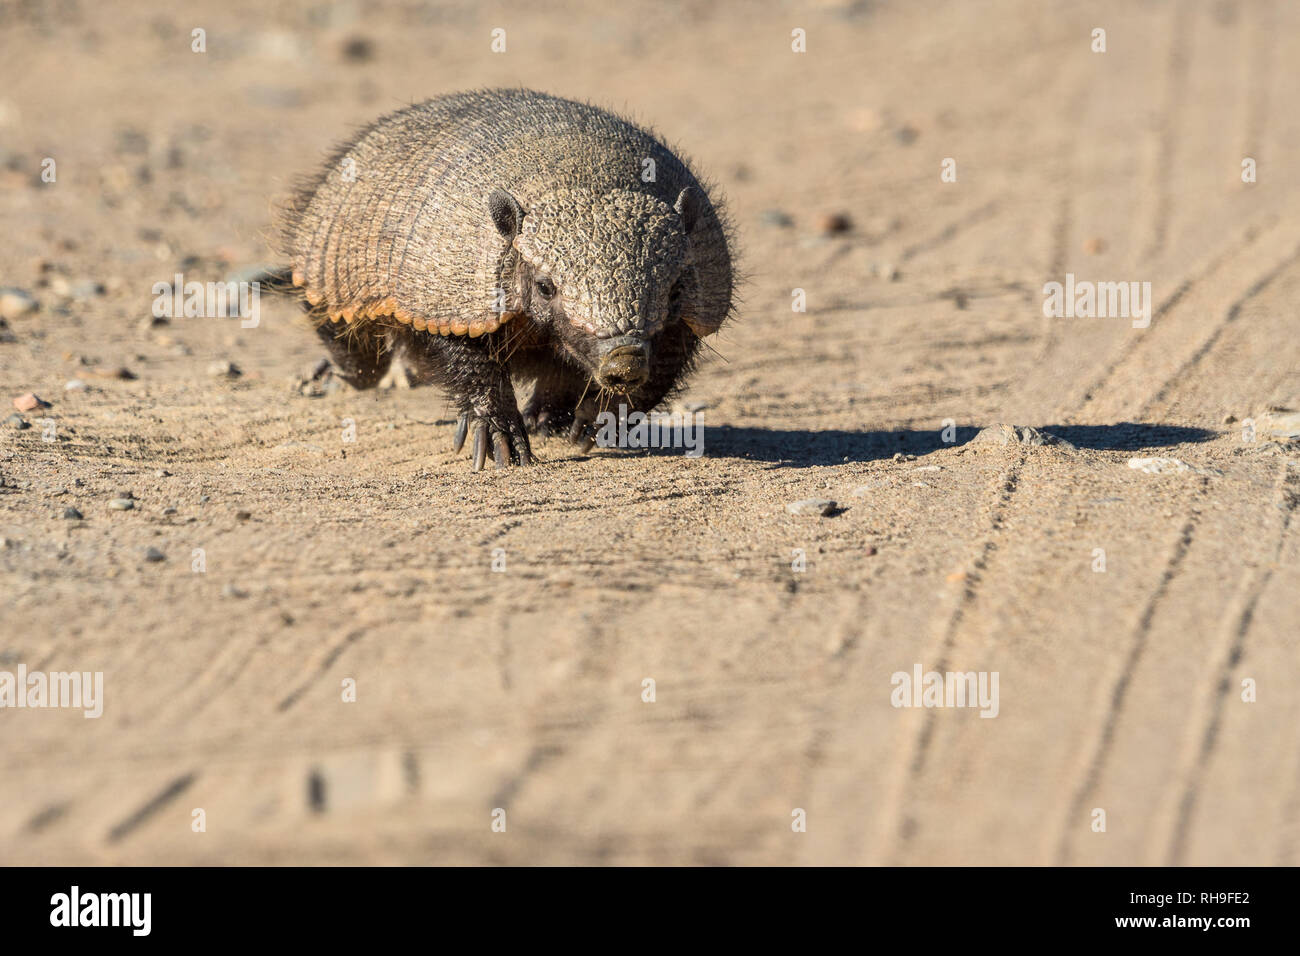 Cute big hairy armadillo on a road in Peninsula Valdés, Argentina Stock Photo